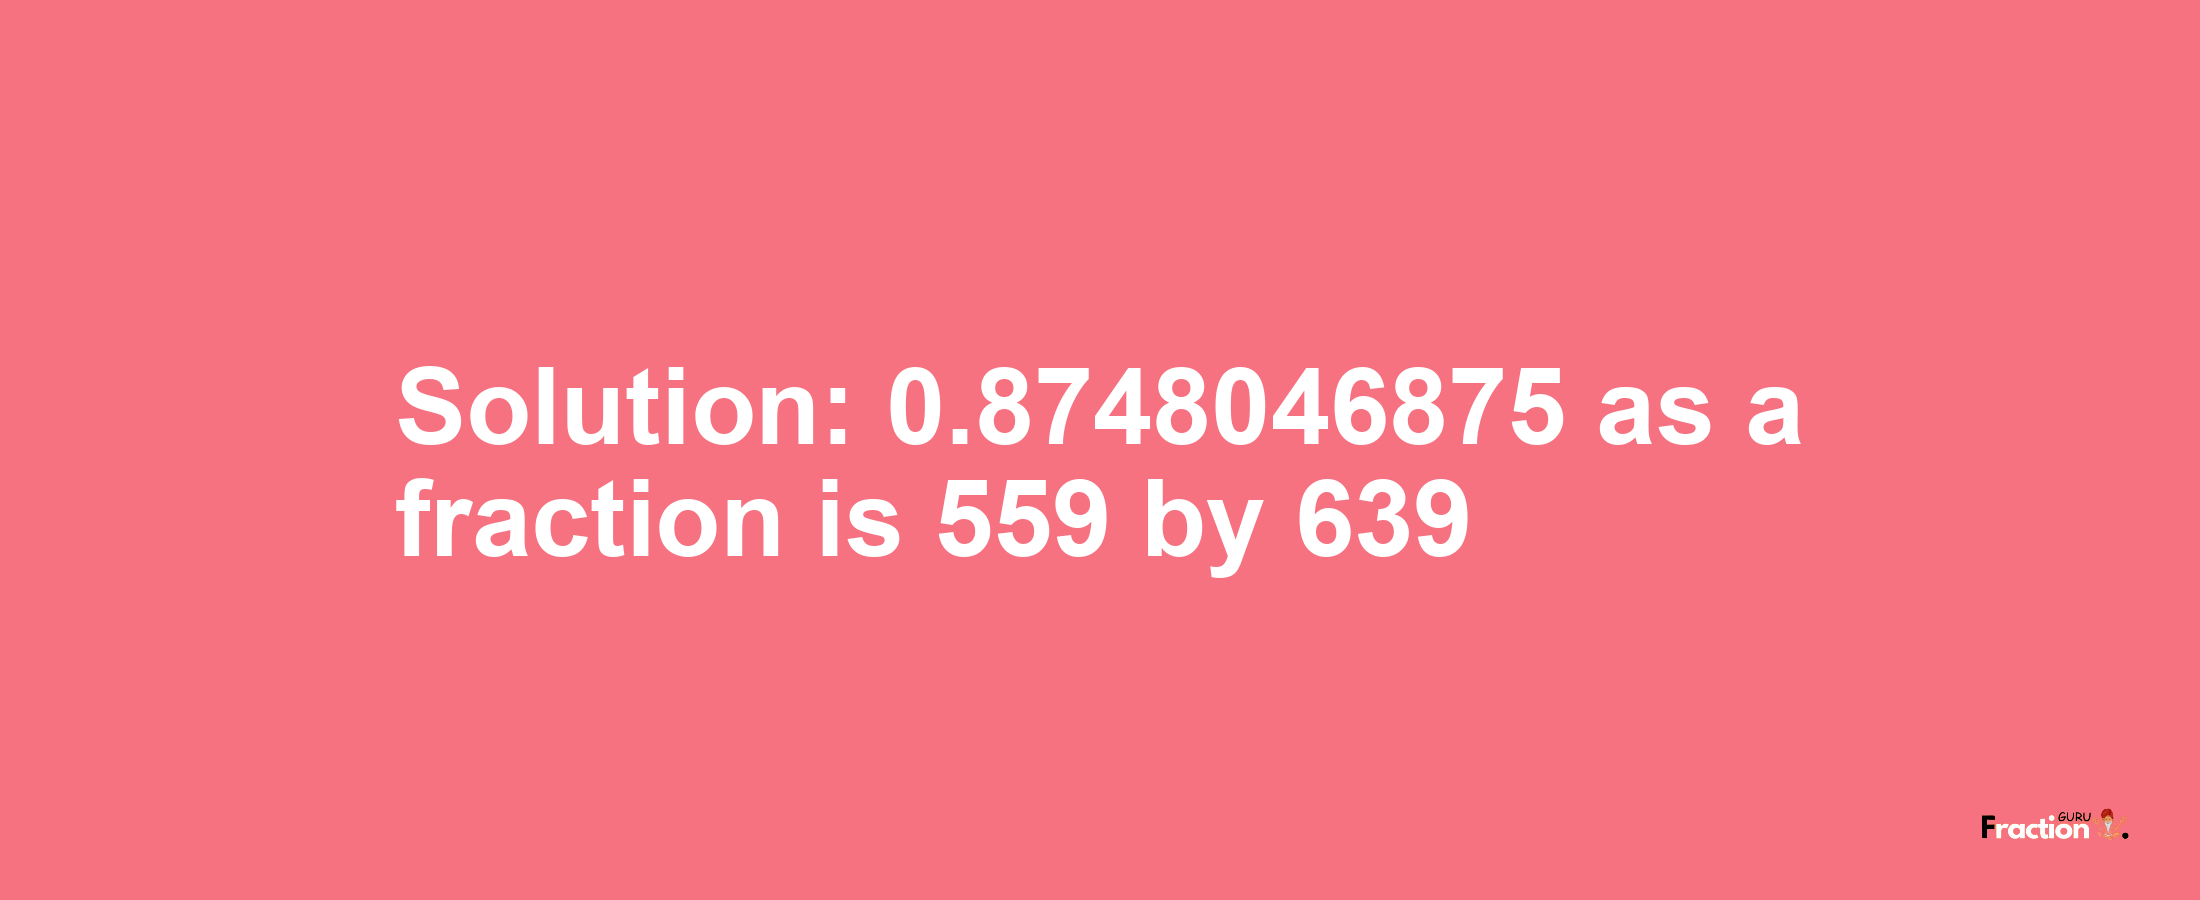 Solution:0.8748046875 as a fraction is 559/639